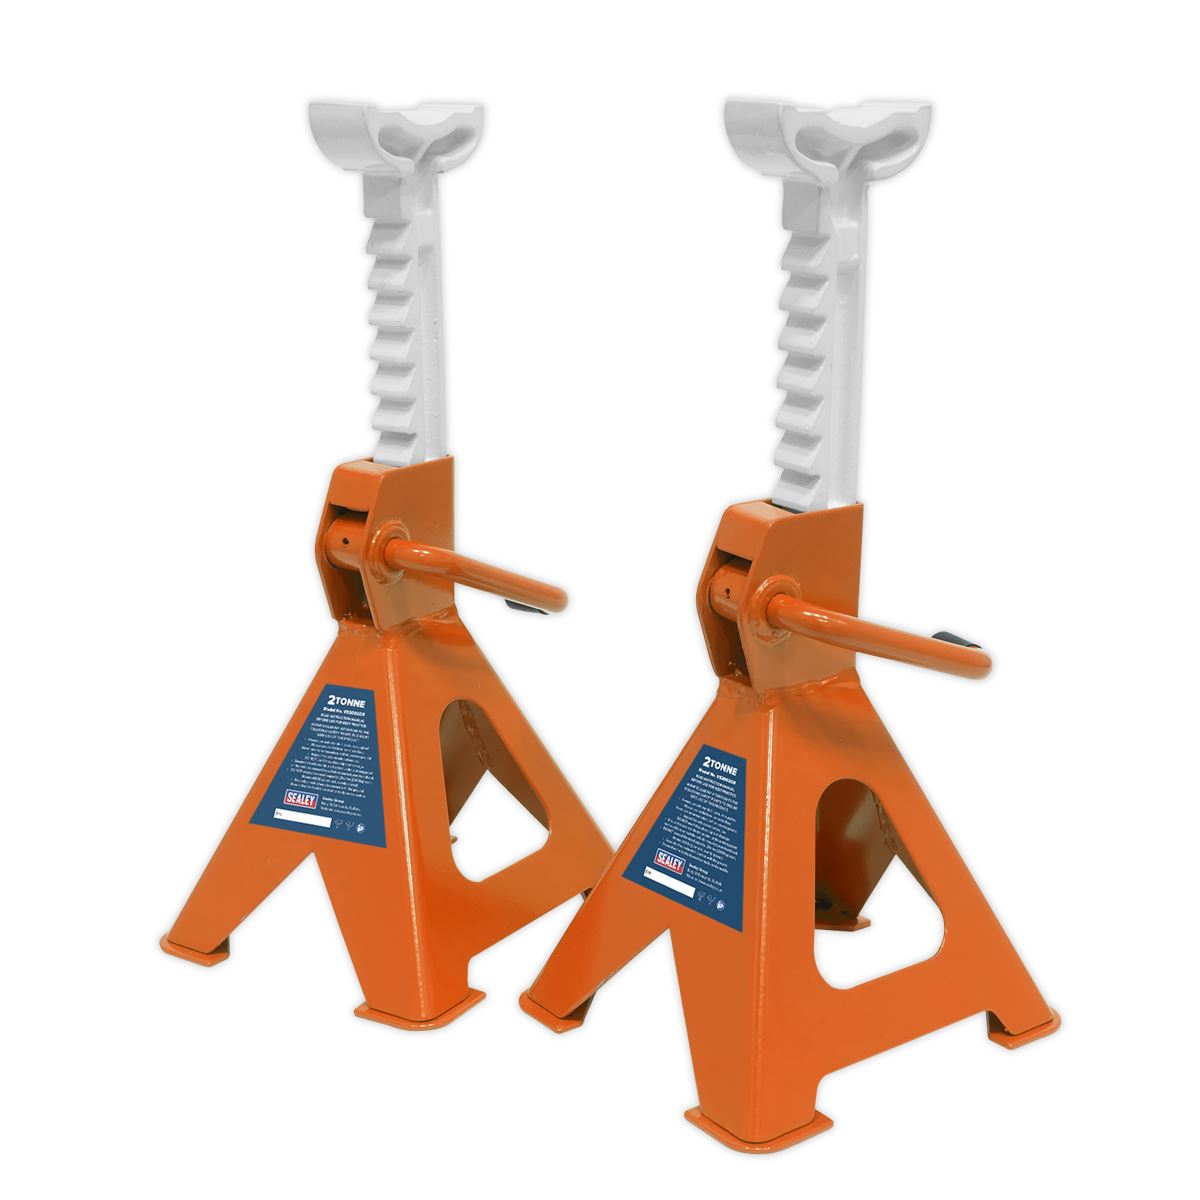 Sealey Axle Stands (Pair) 2 Tonne Capacity per Stand Ratchet Type - Orange